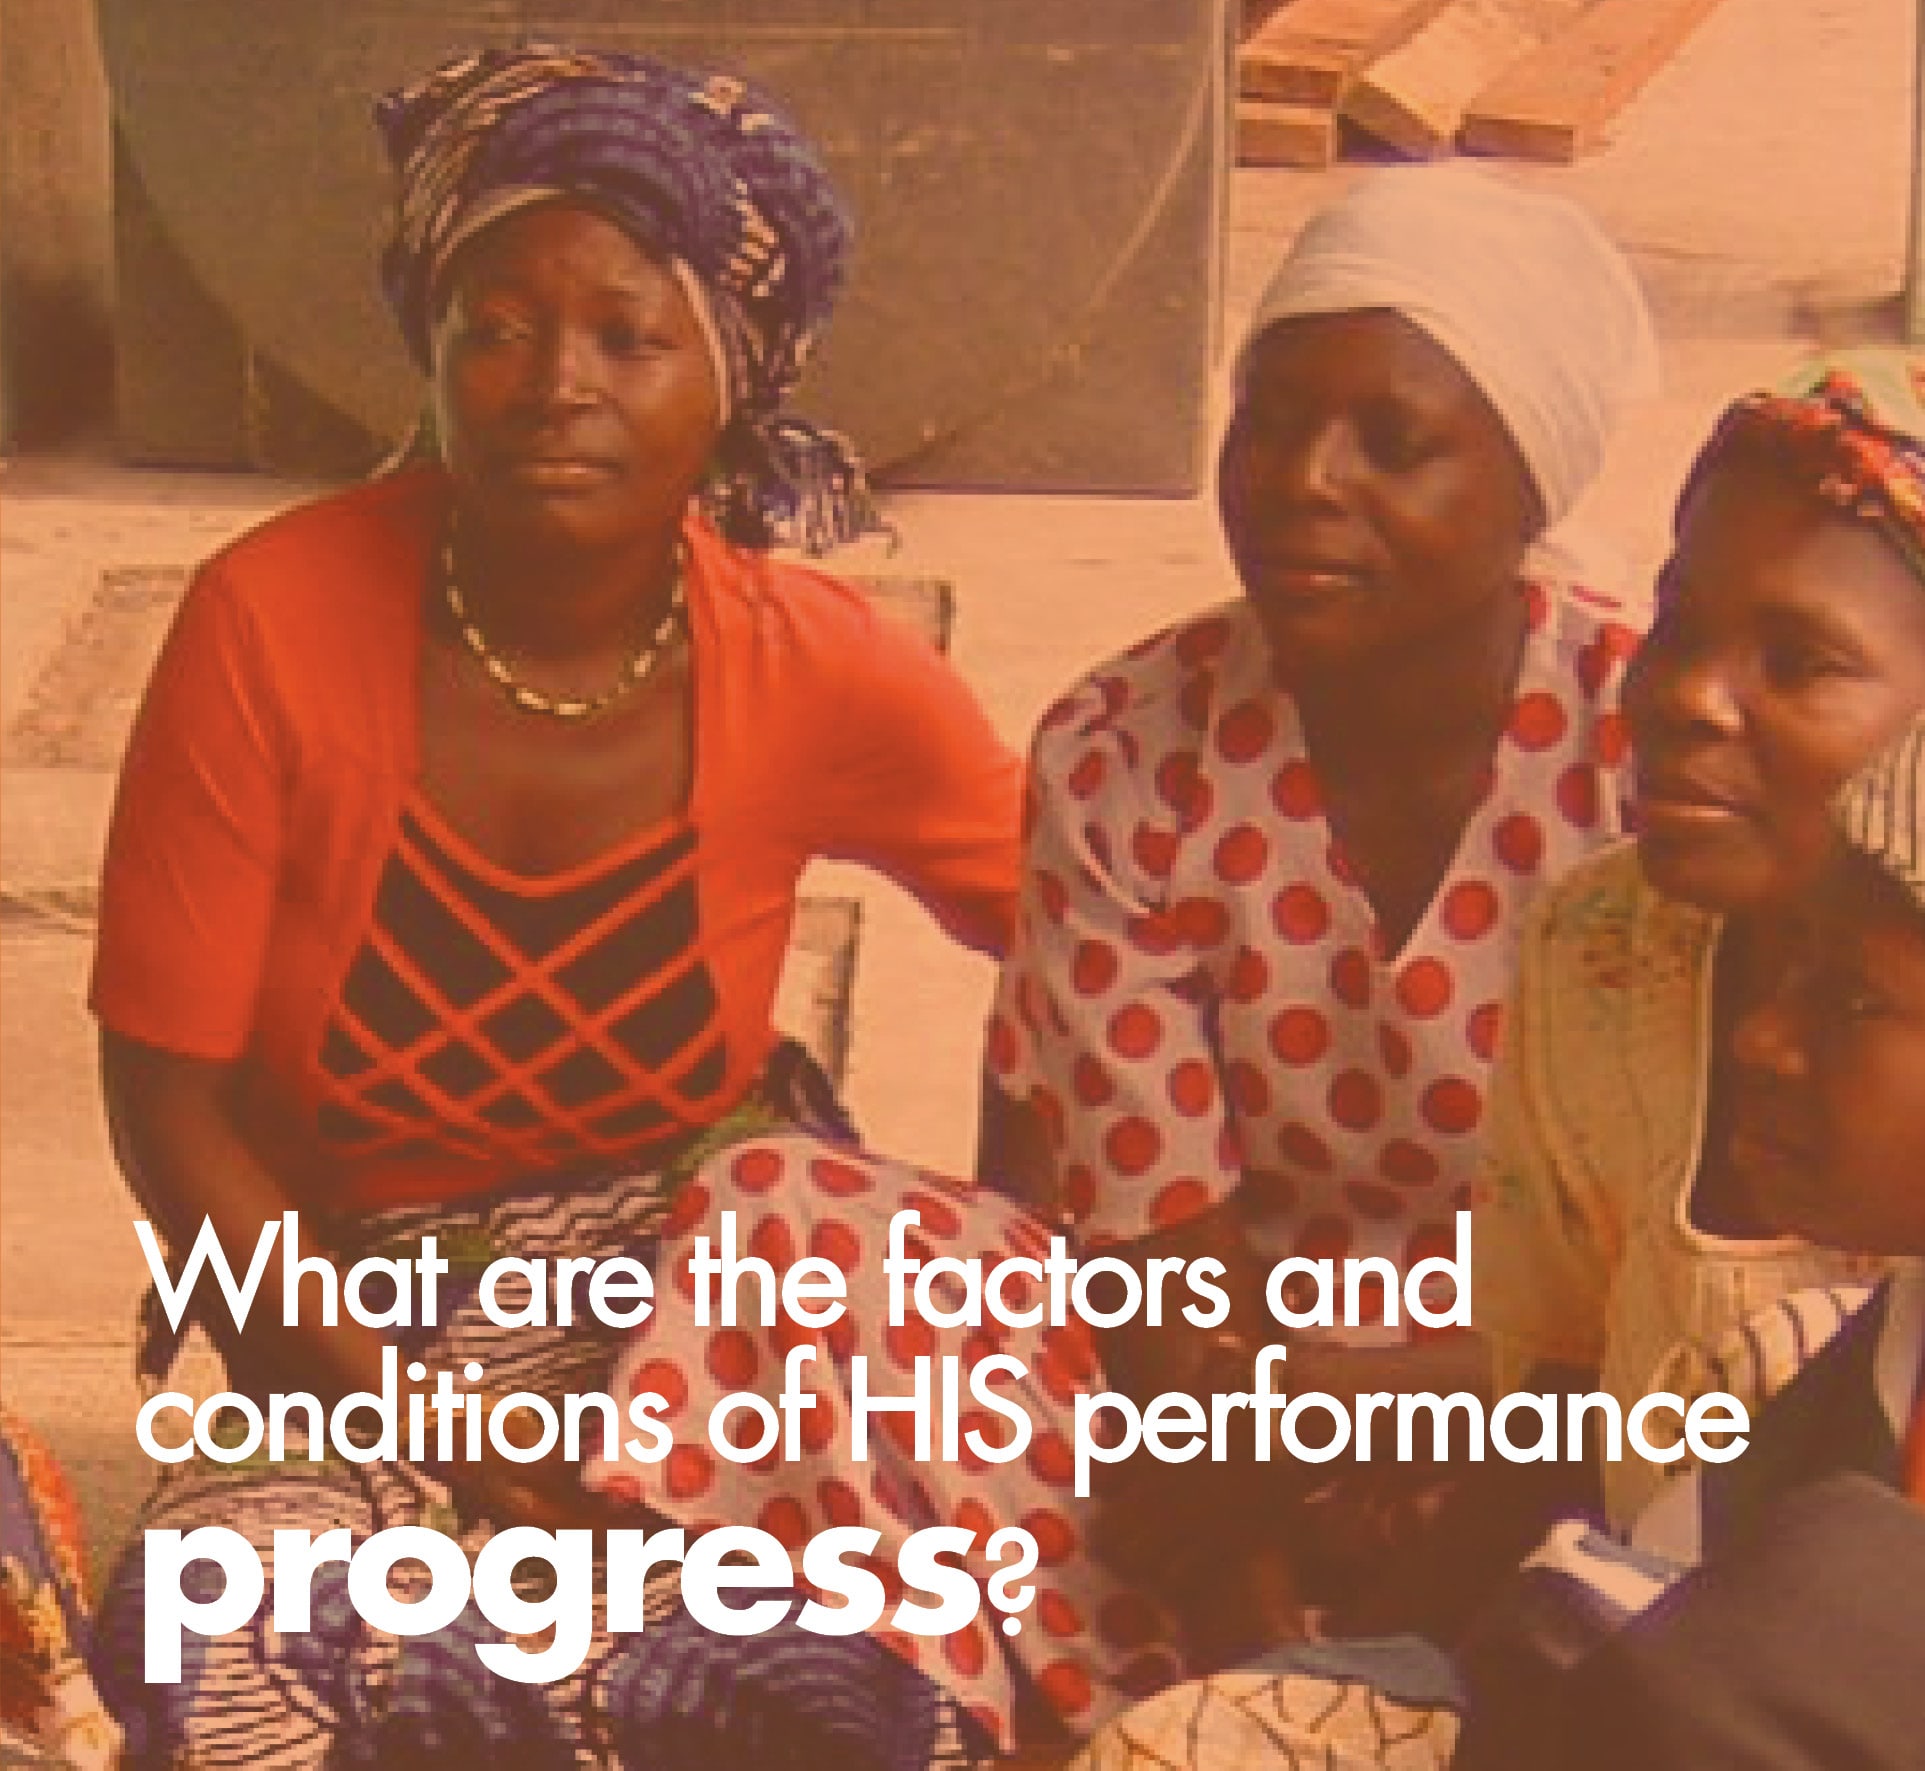 What are the factors and conditions of HIS performance and progress?